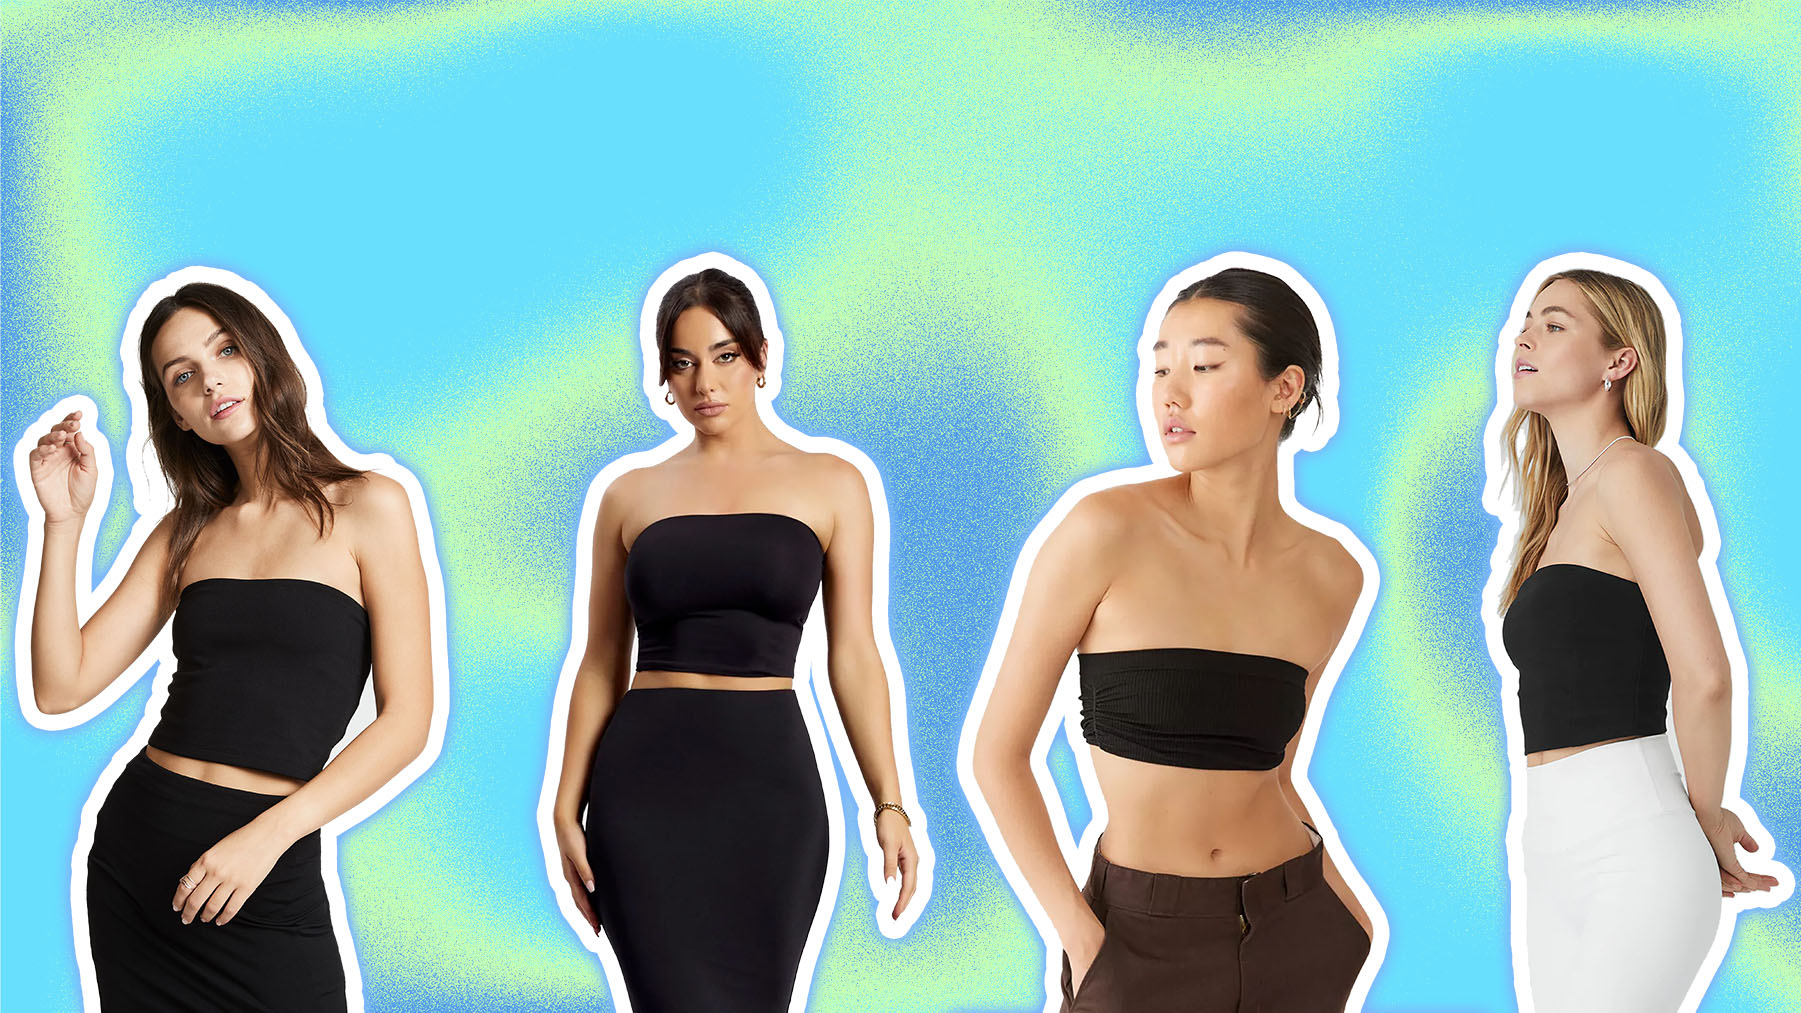 How to Wear a Tube Top